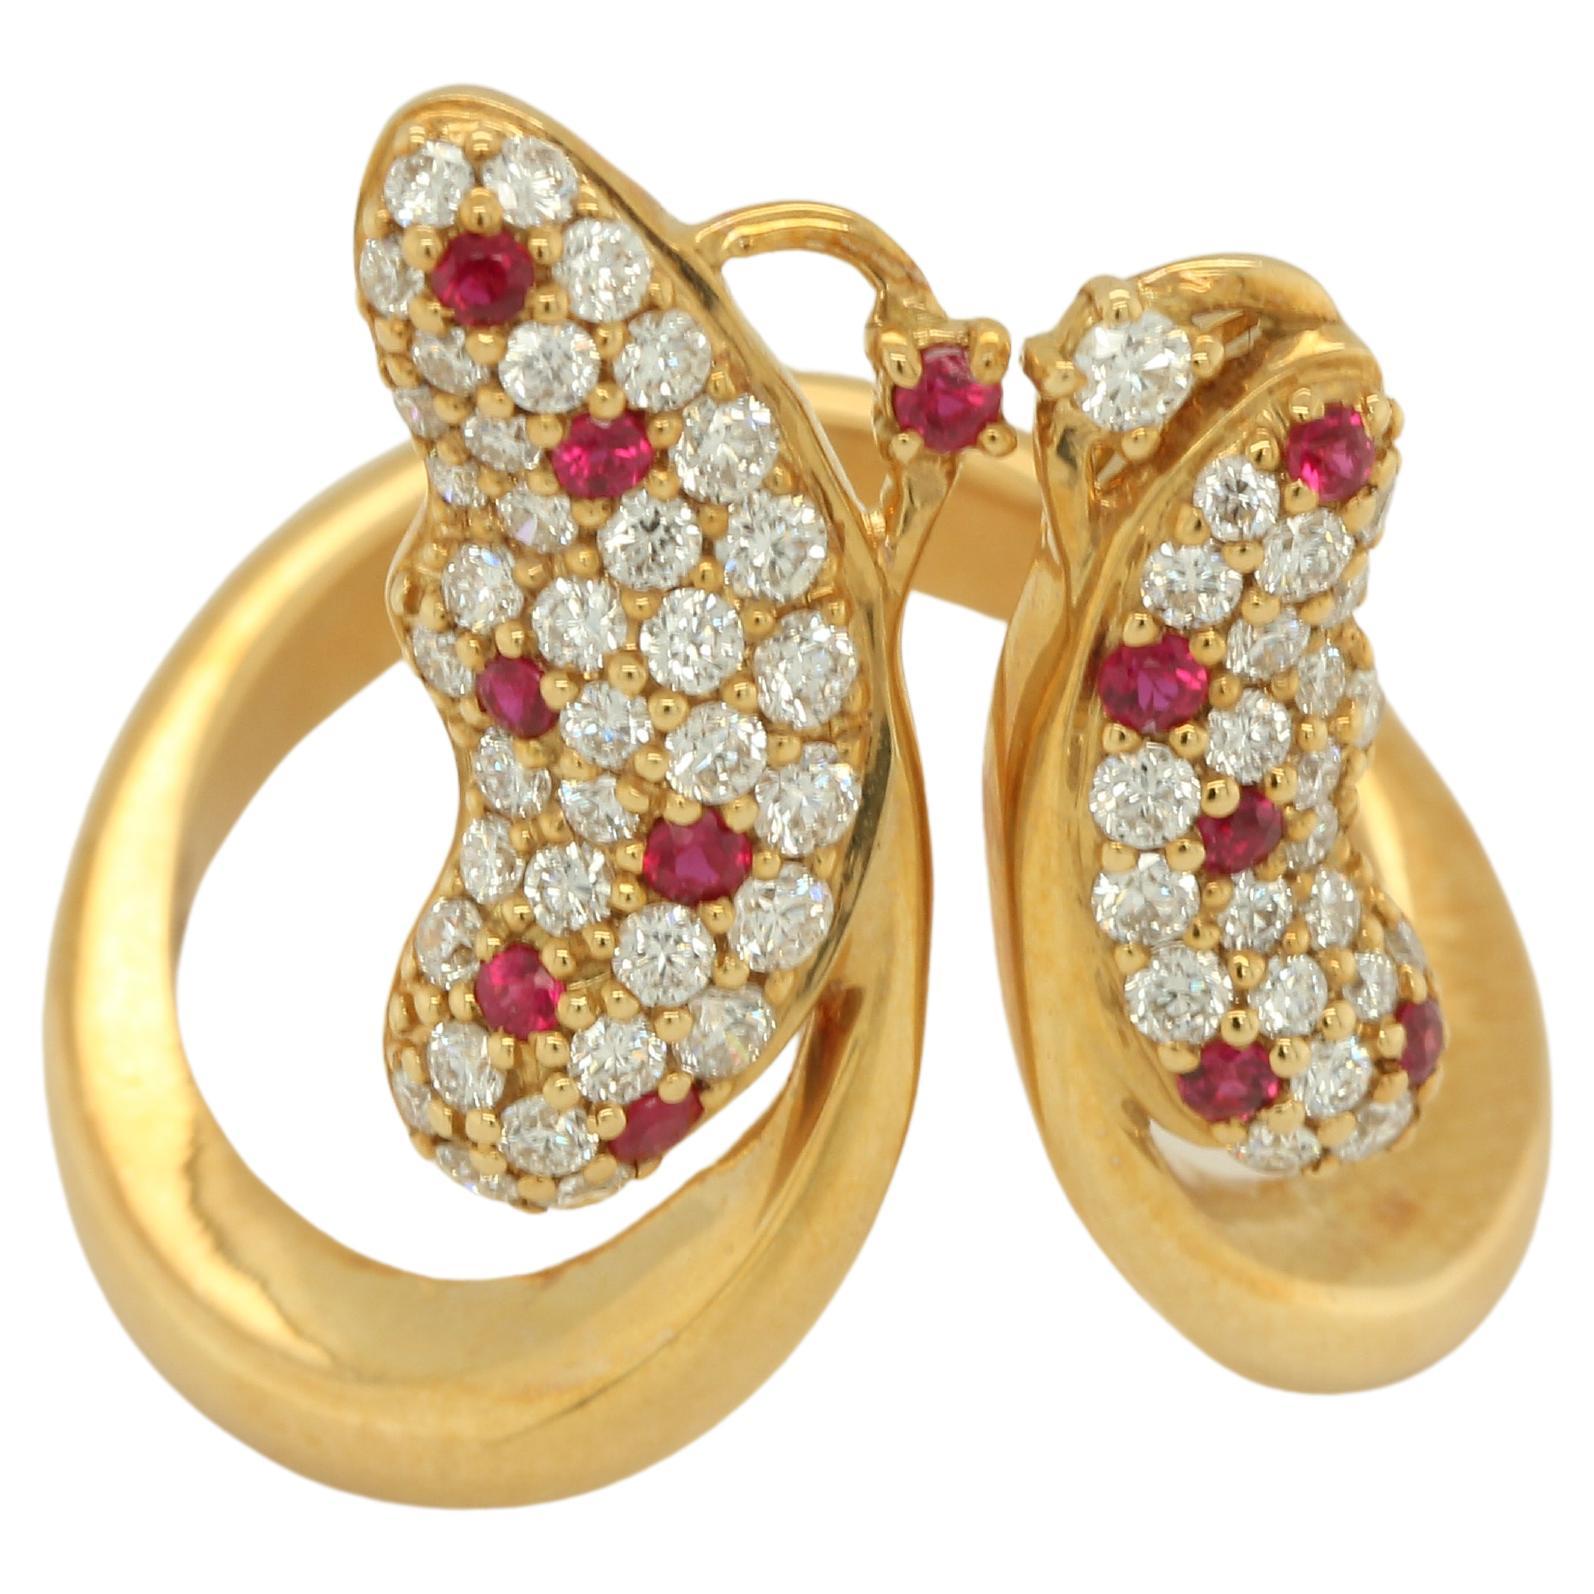 A gorgeous ruby and diamond butterfly ring in 18K gold. The Butterfly is considered one of the most stunning and graceful creatures. As the name suggests, this ring is like a butterfly's wings: delicate, beautiful, and poised for flight. This style